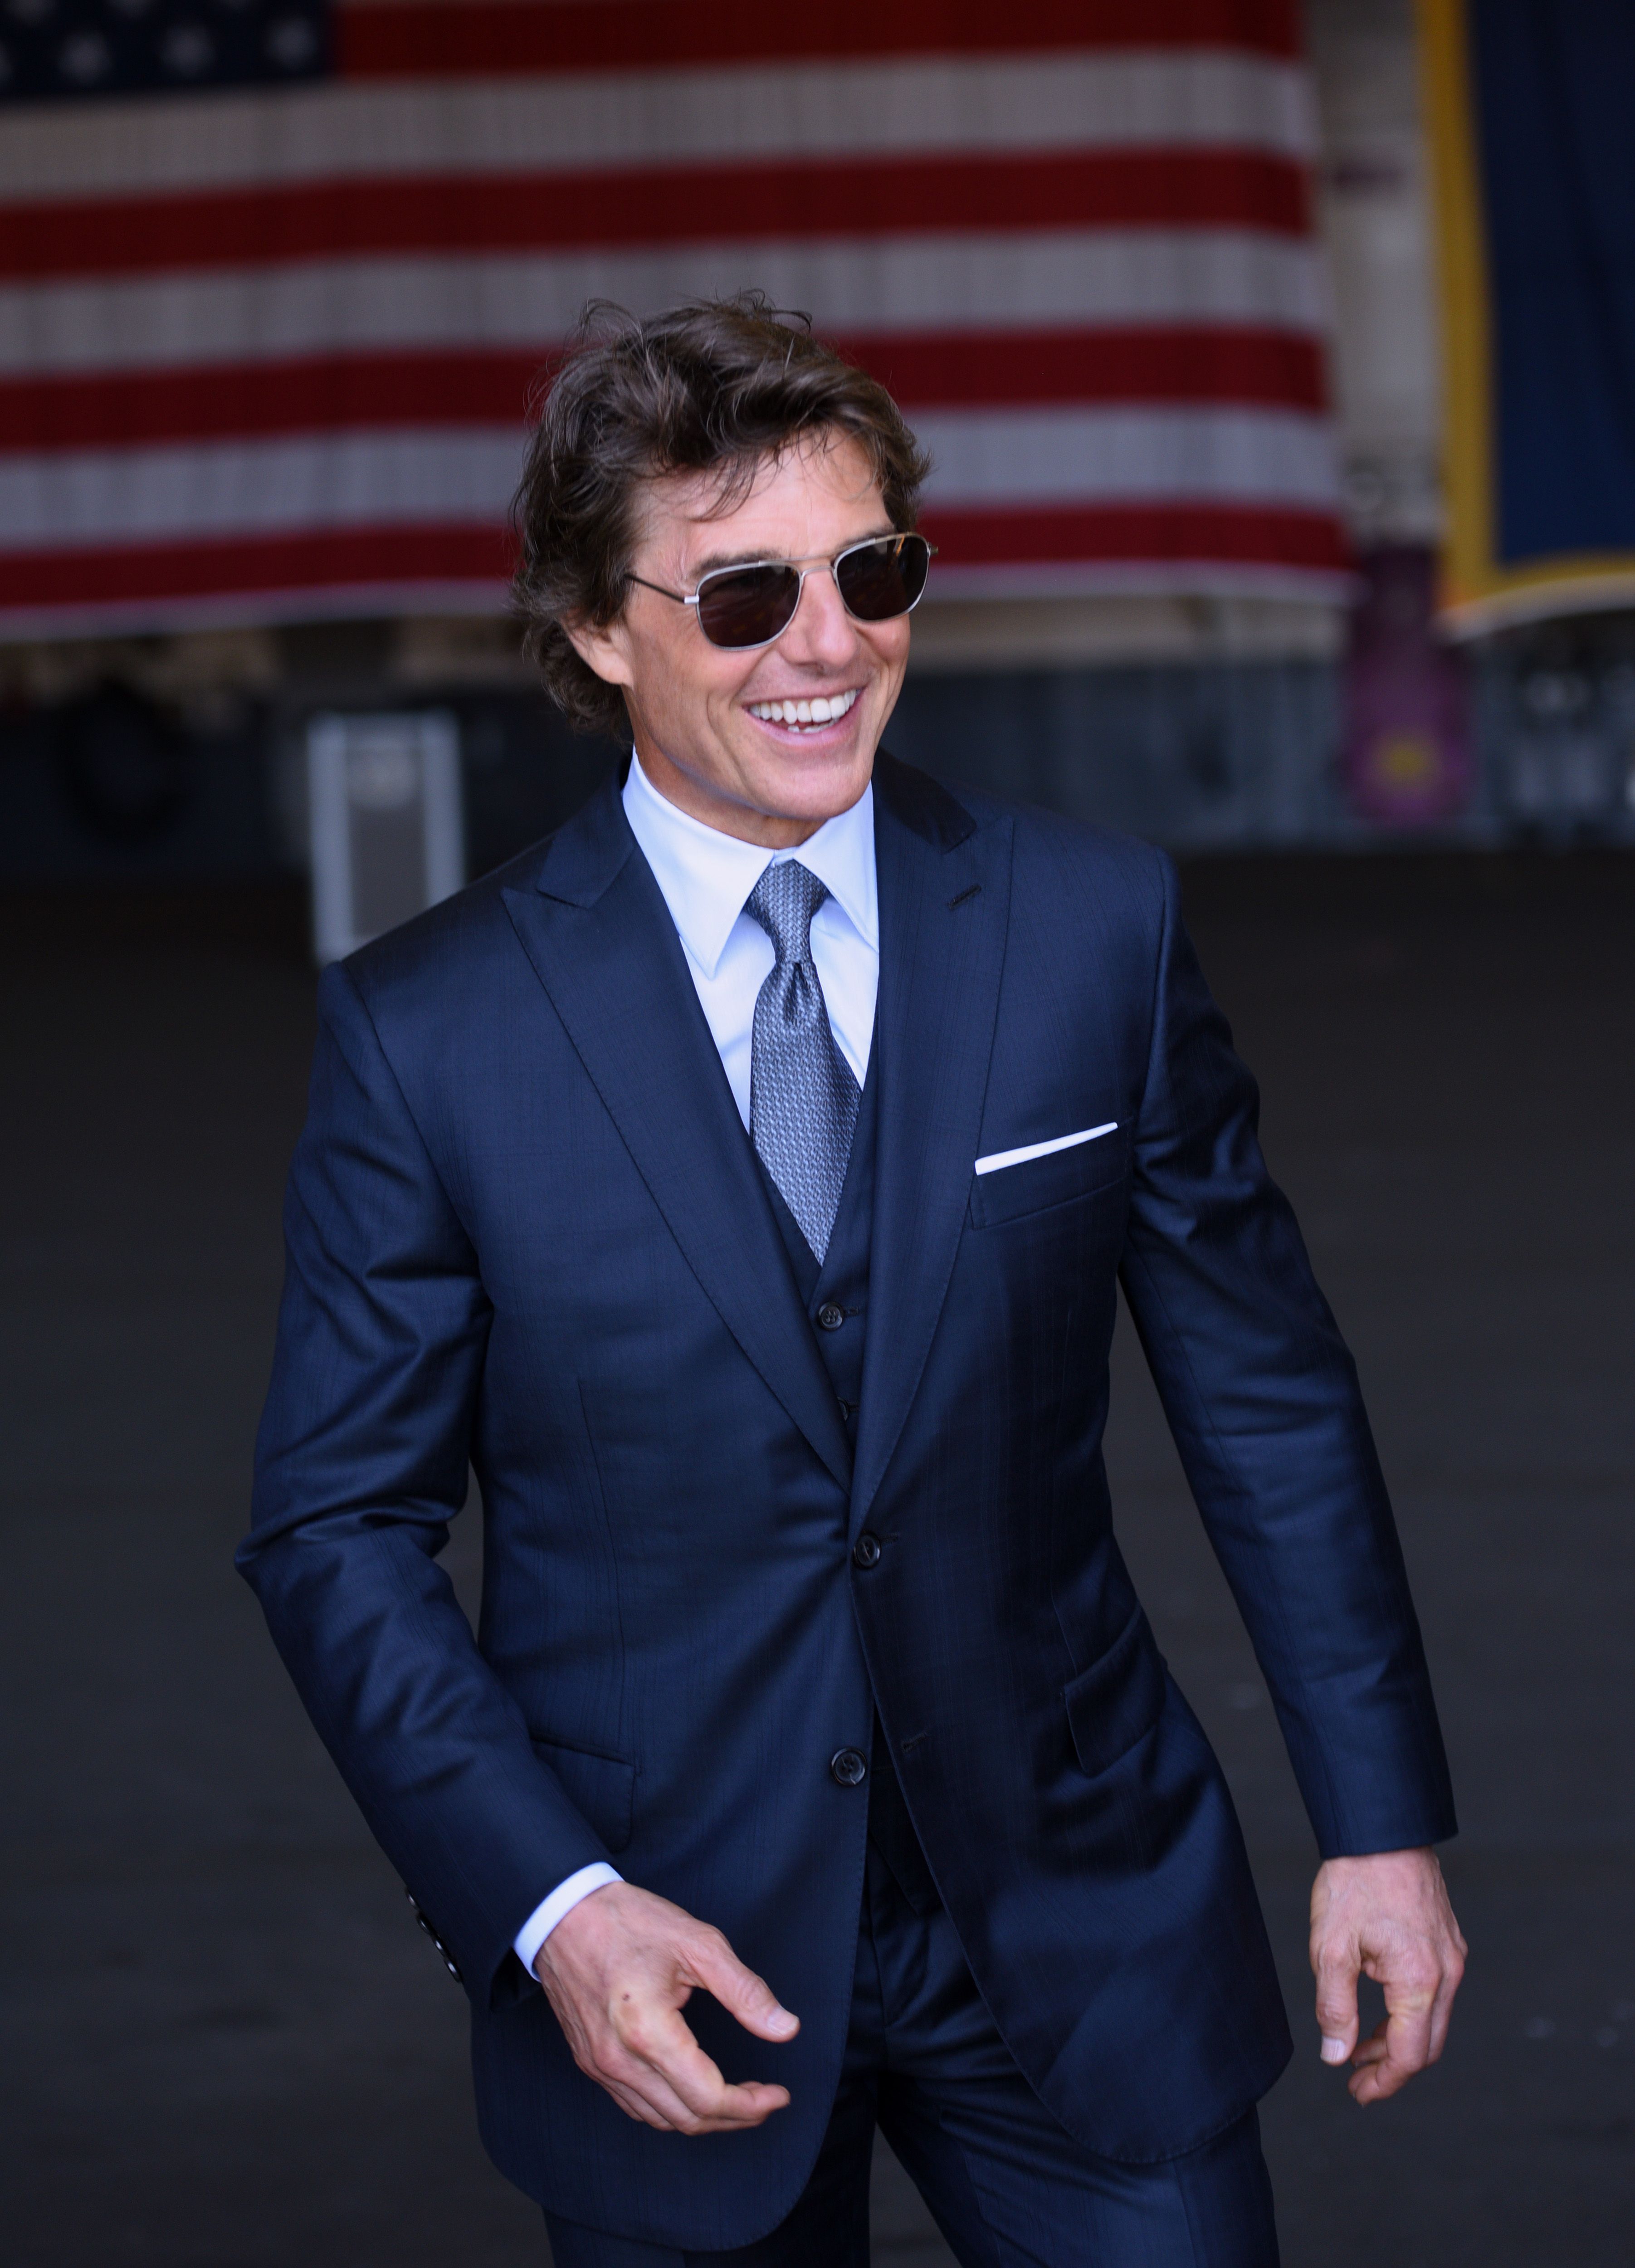 Tom Cruise Talks Making Top Gun: Maverick in a New PEOPLE Special Edition